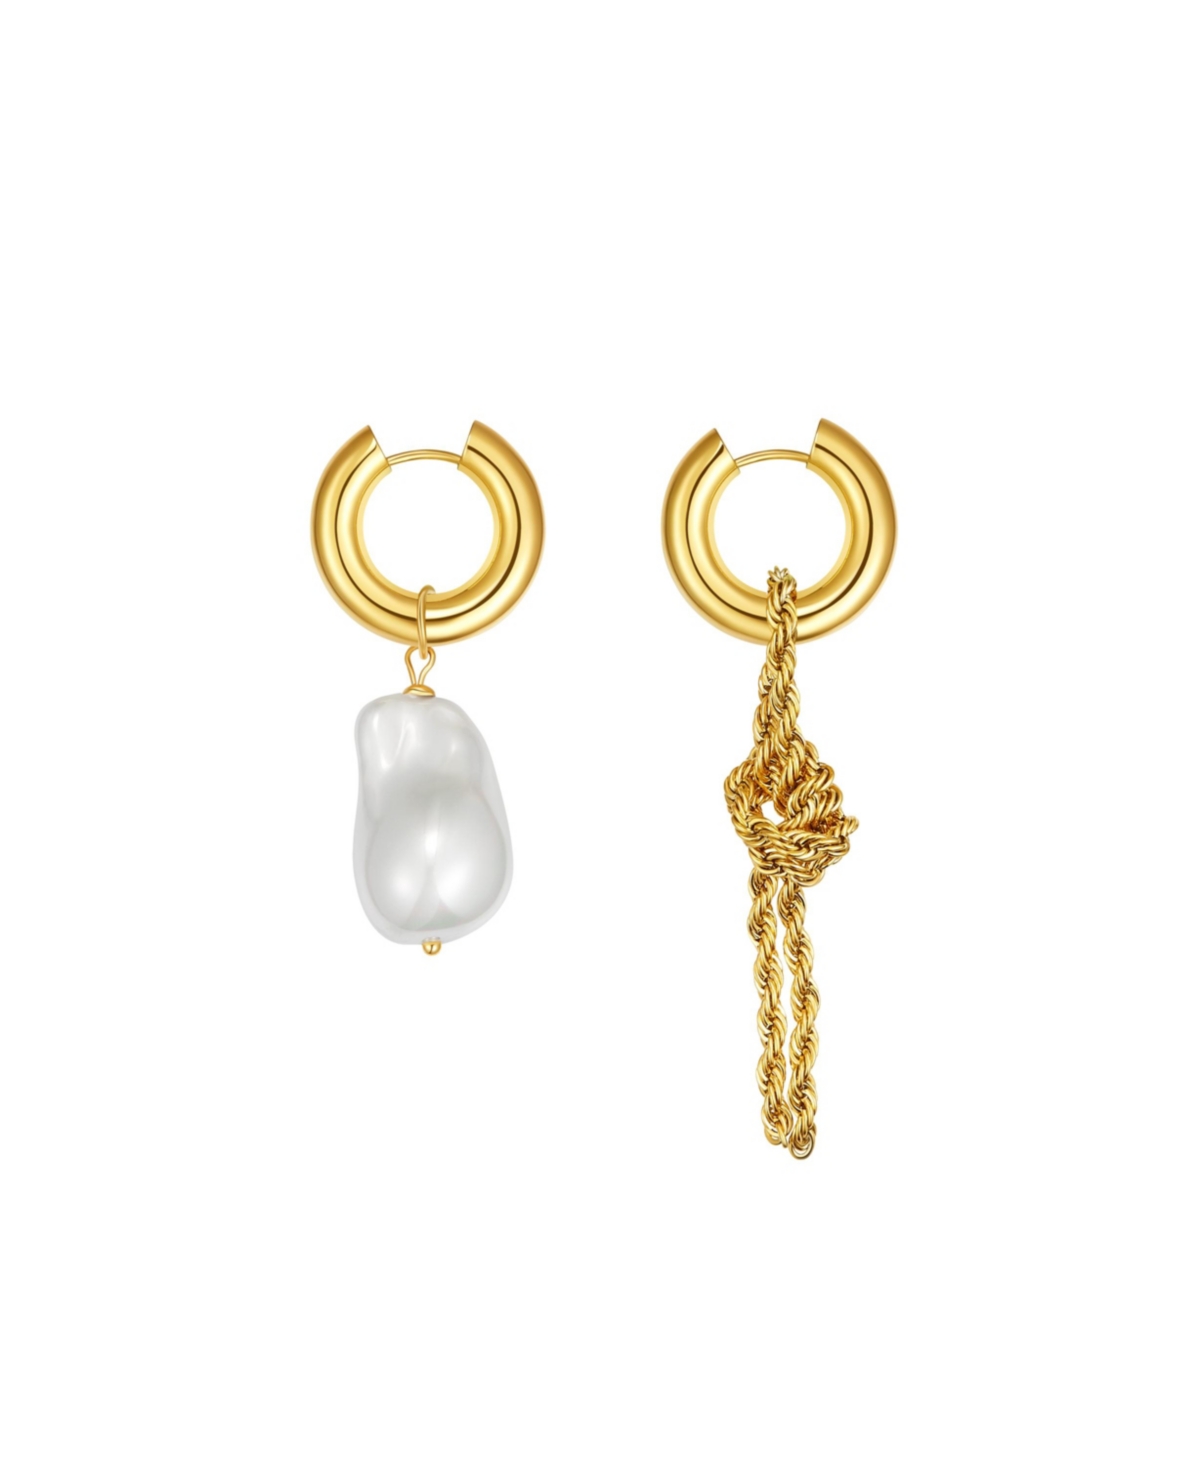 Unique Asymmetrical Rope Chain Baroque Pearl Drop Earrings - Gold